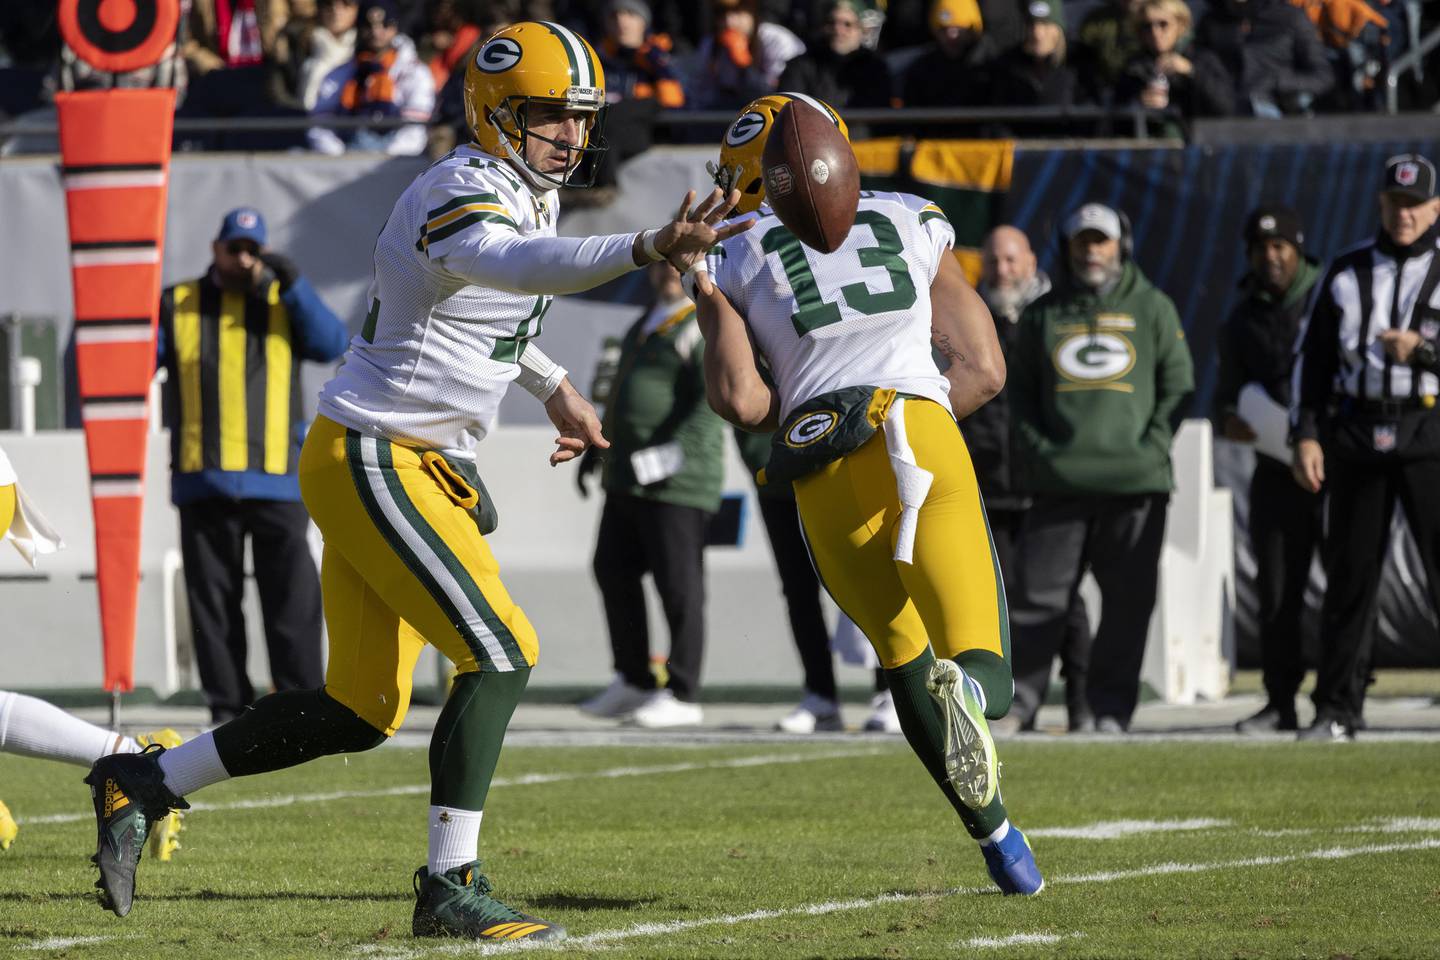 Packers quarterback Aaron Rodgers tosses a pass during the first quarter on Dec. 4, 2022, at Soldier Field.